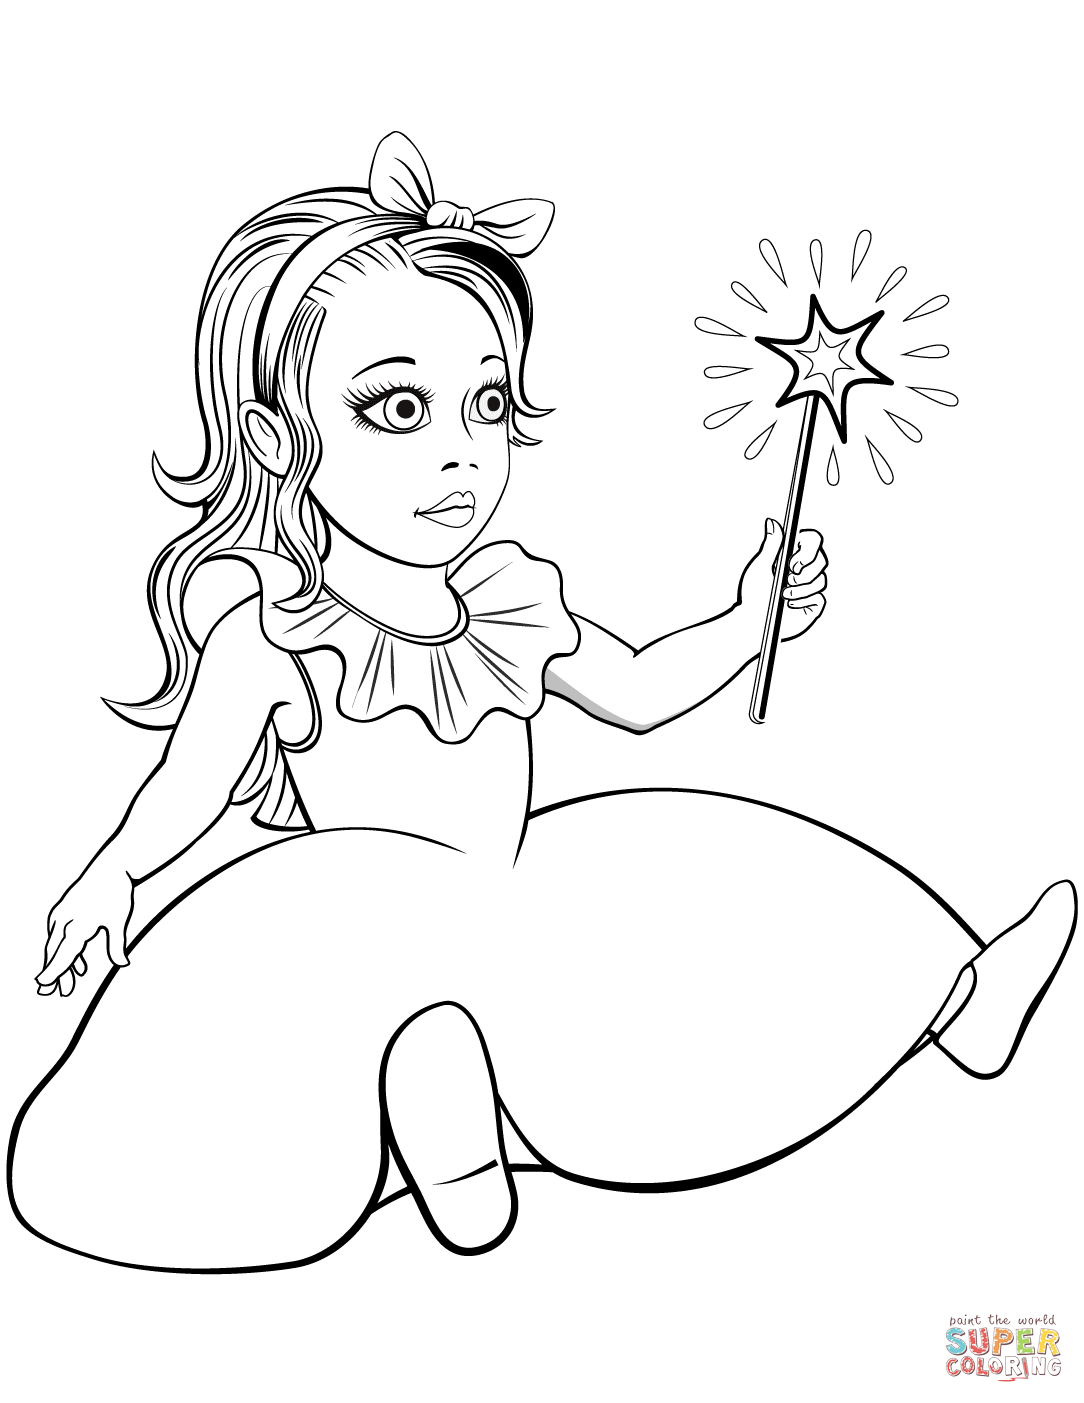 doll-with-magic-wand-coloring-page